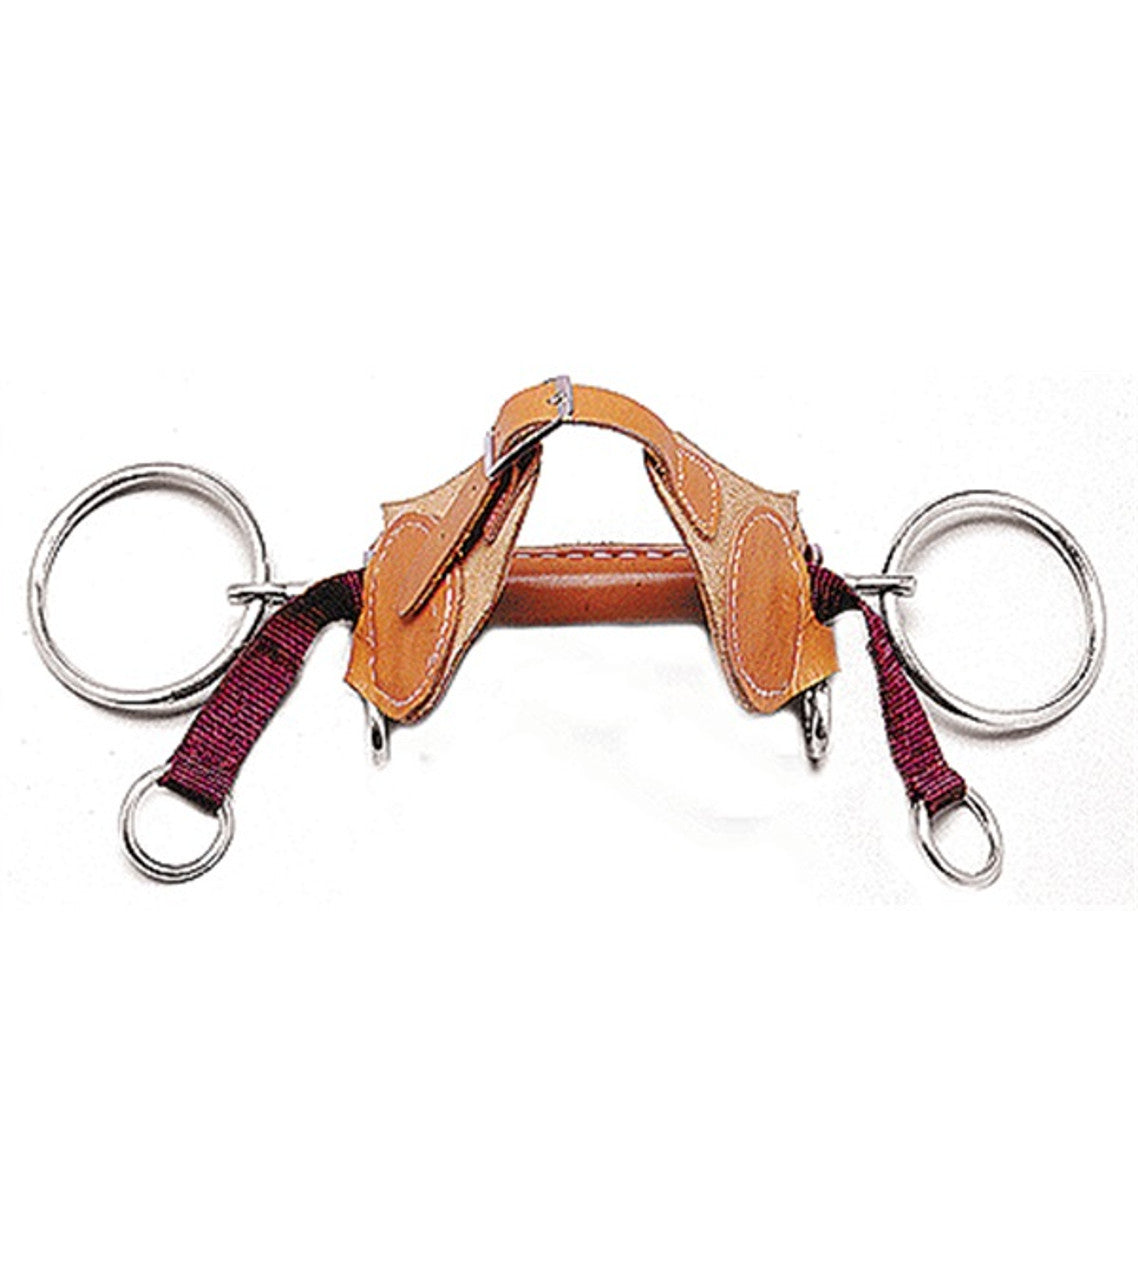 Slide Mouth Run Out Bit with Straps-TexanSaddles.com